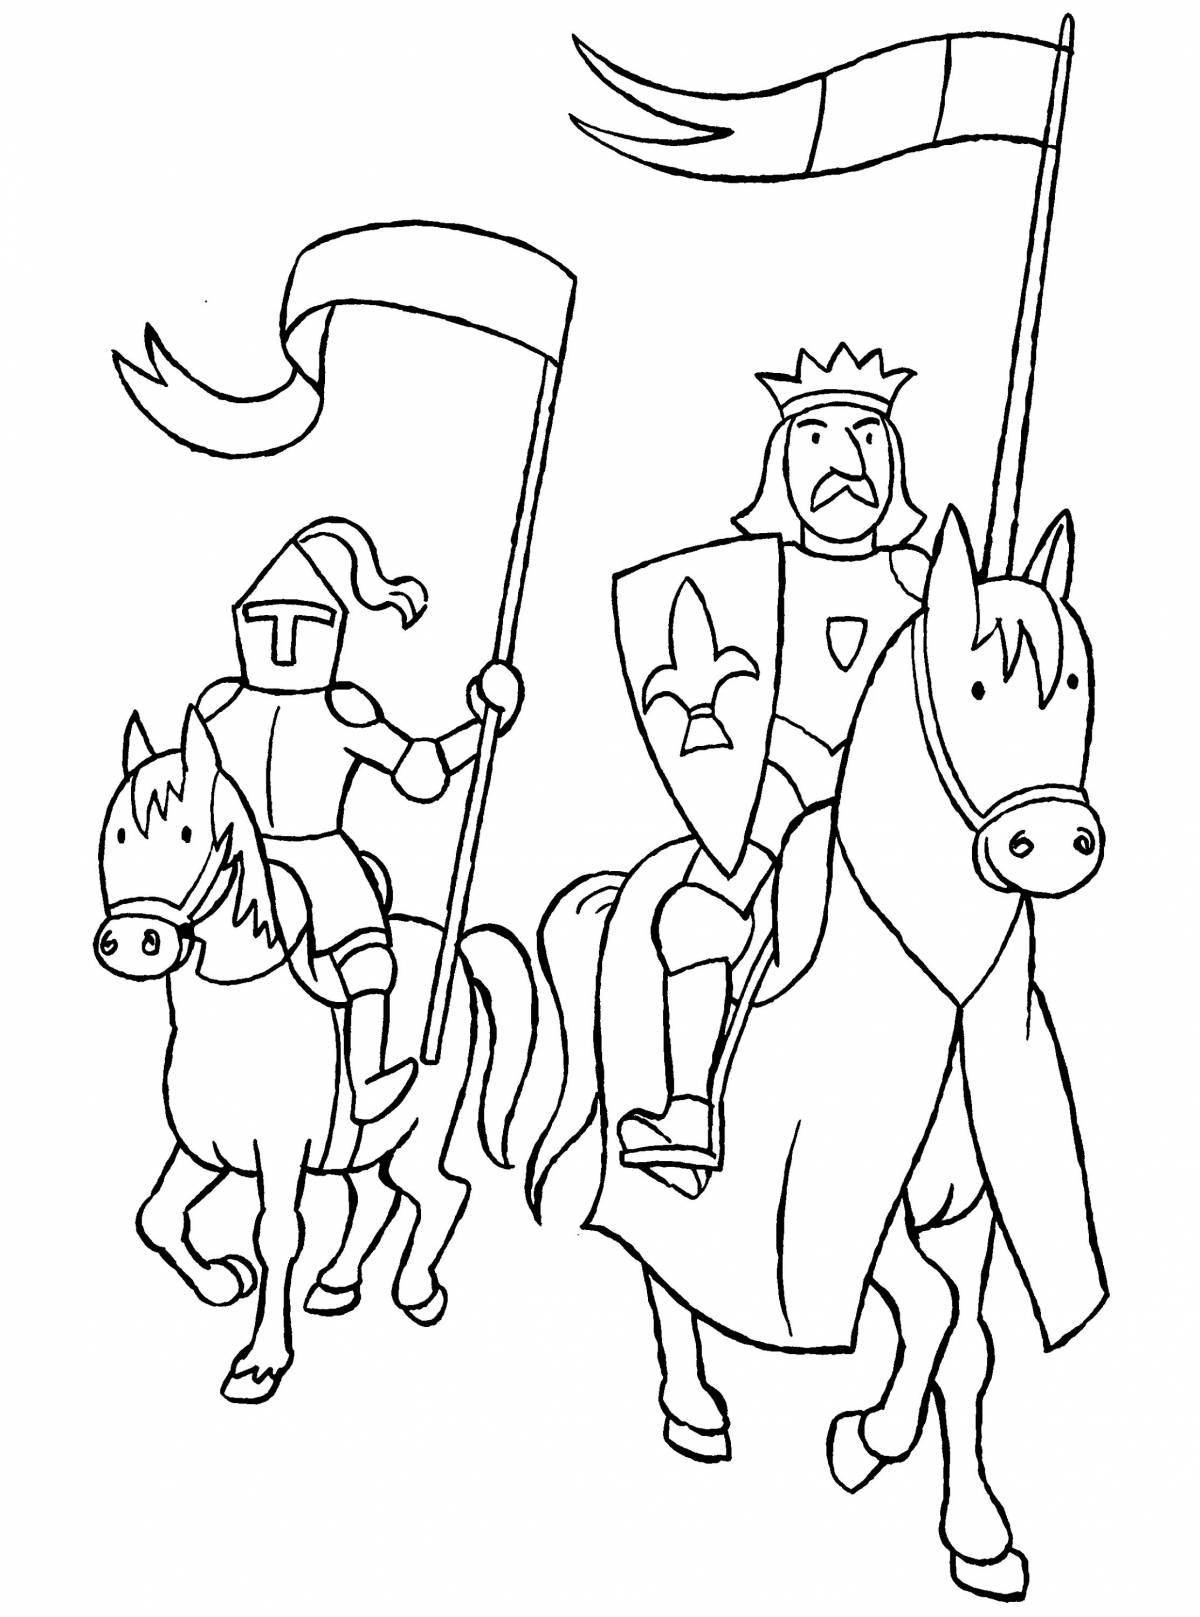 Luxury coloring book knight for kids